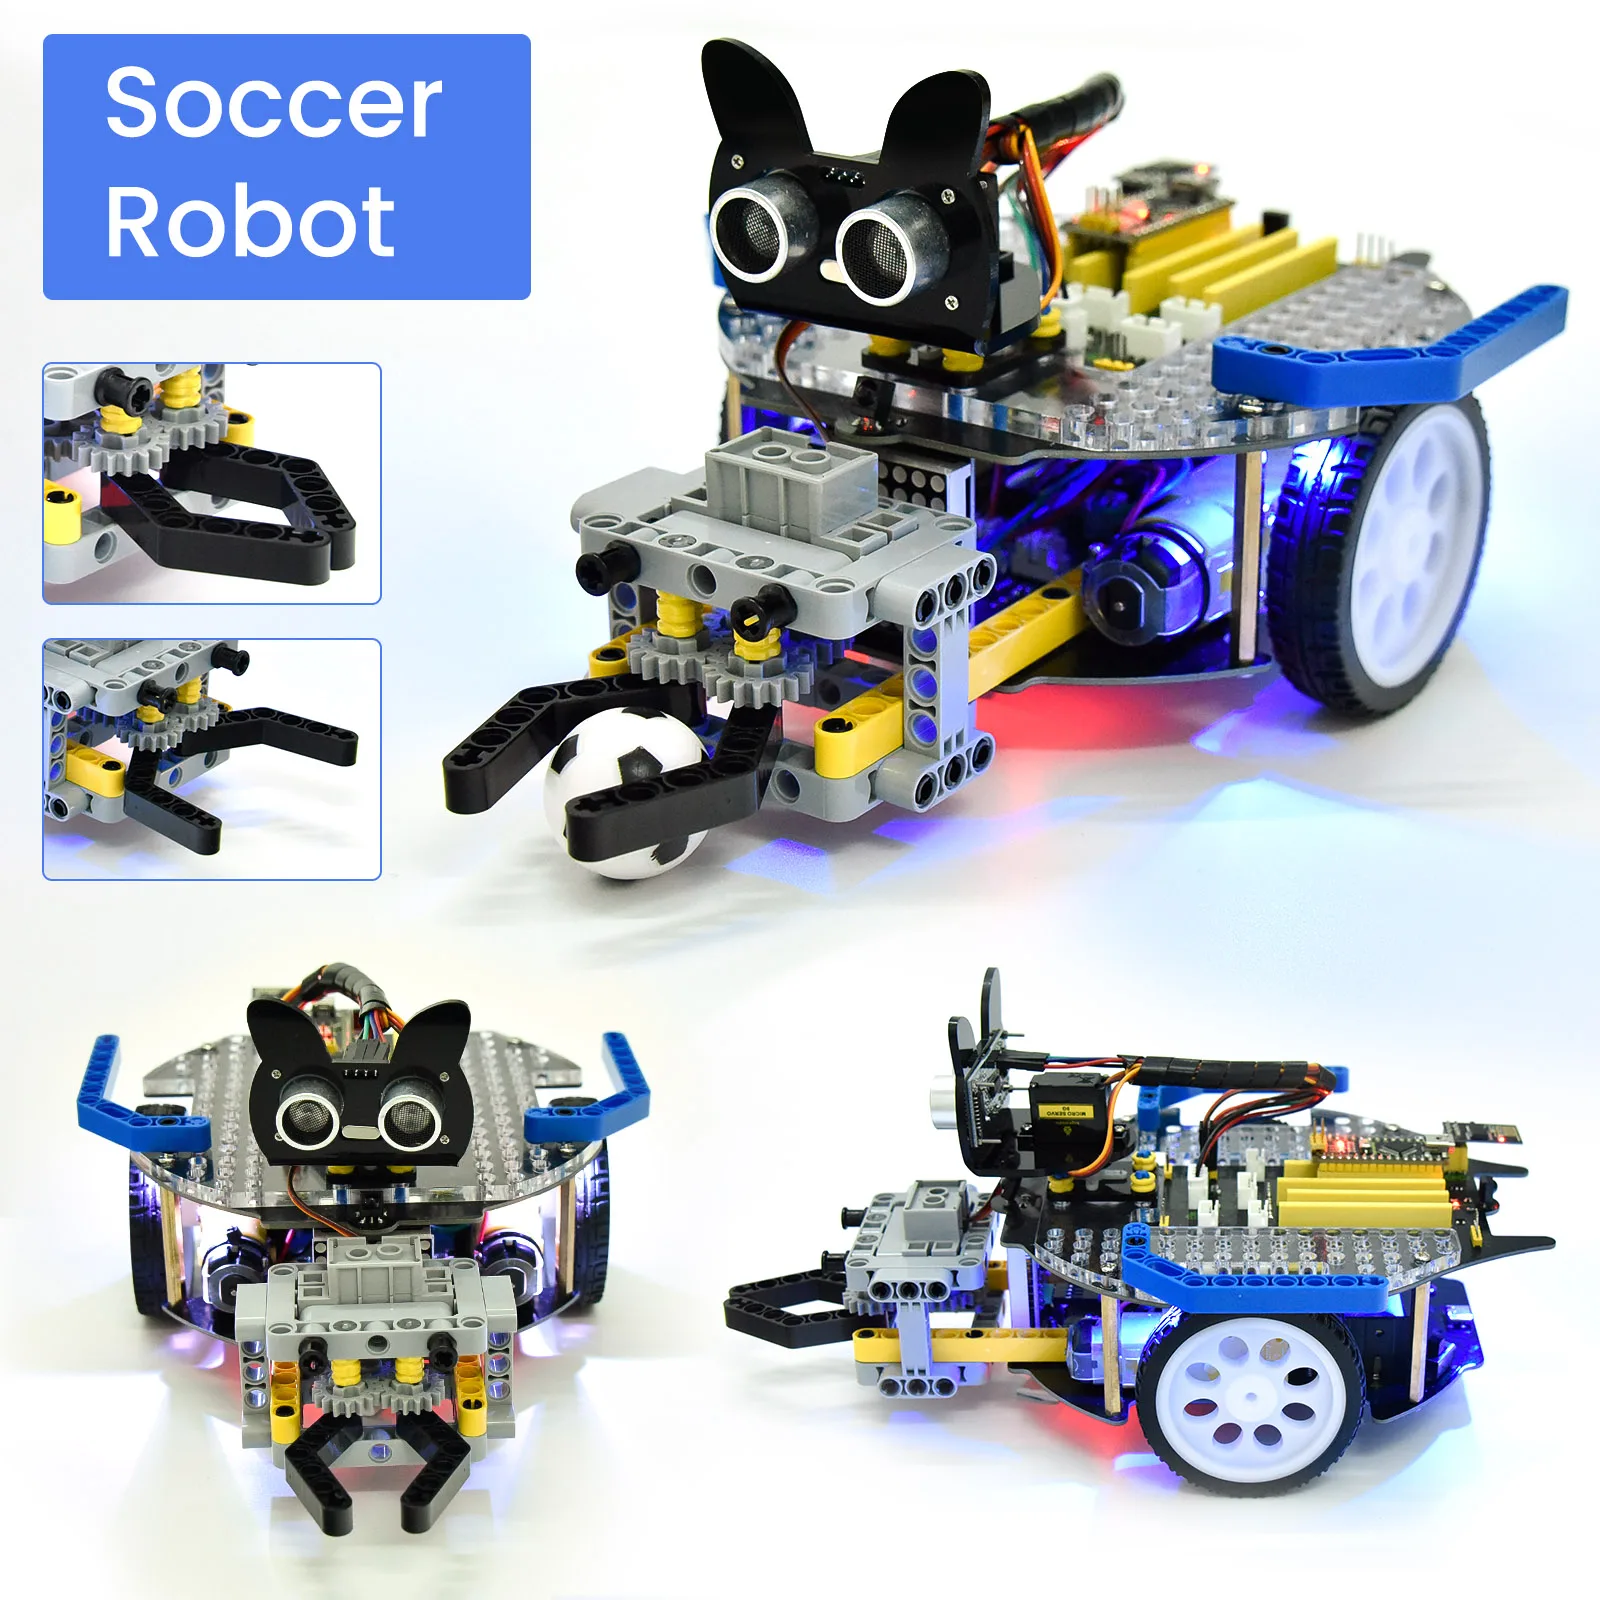 Keyestudio 3 in 1 Beetlebot Robot Car for Arduino(Raspberry Pi Pico/ESP32) STEM Education DIY Kit Compatible with LEGO+Projects